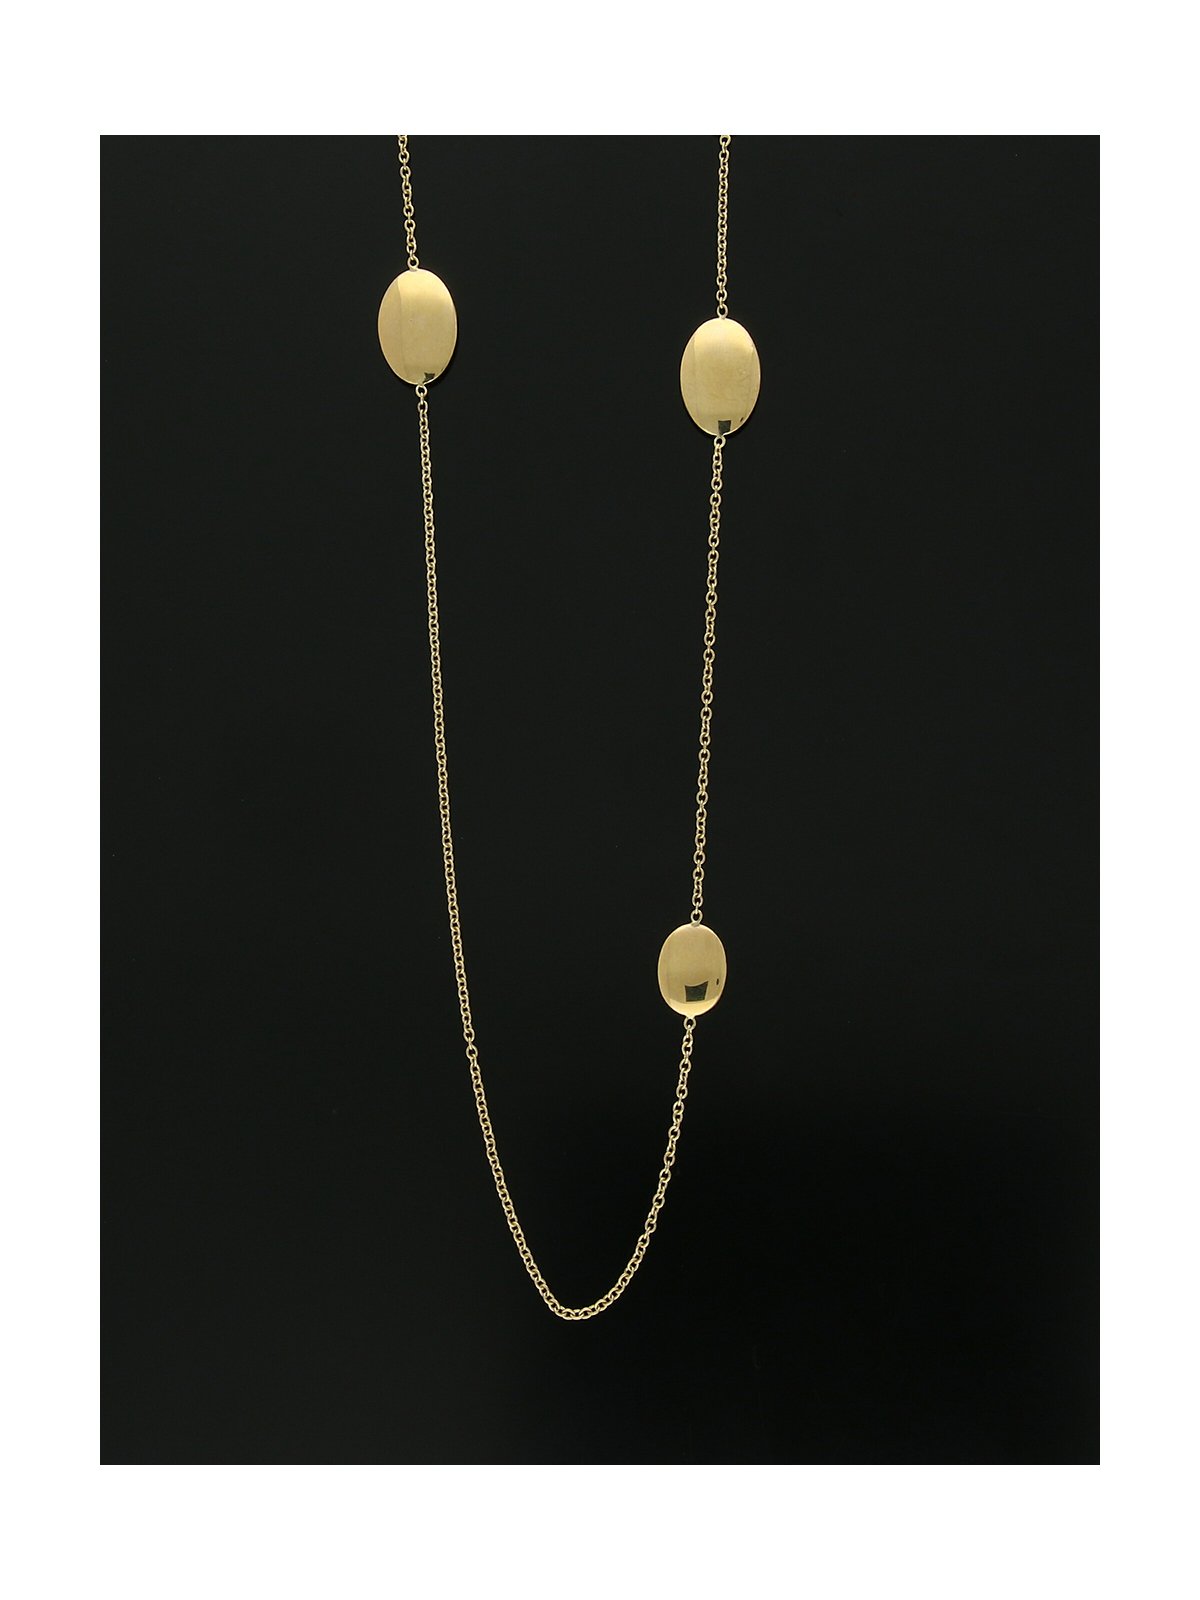 Polished Ovals Station Necklace 80cm in 9ct Yellow Gold